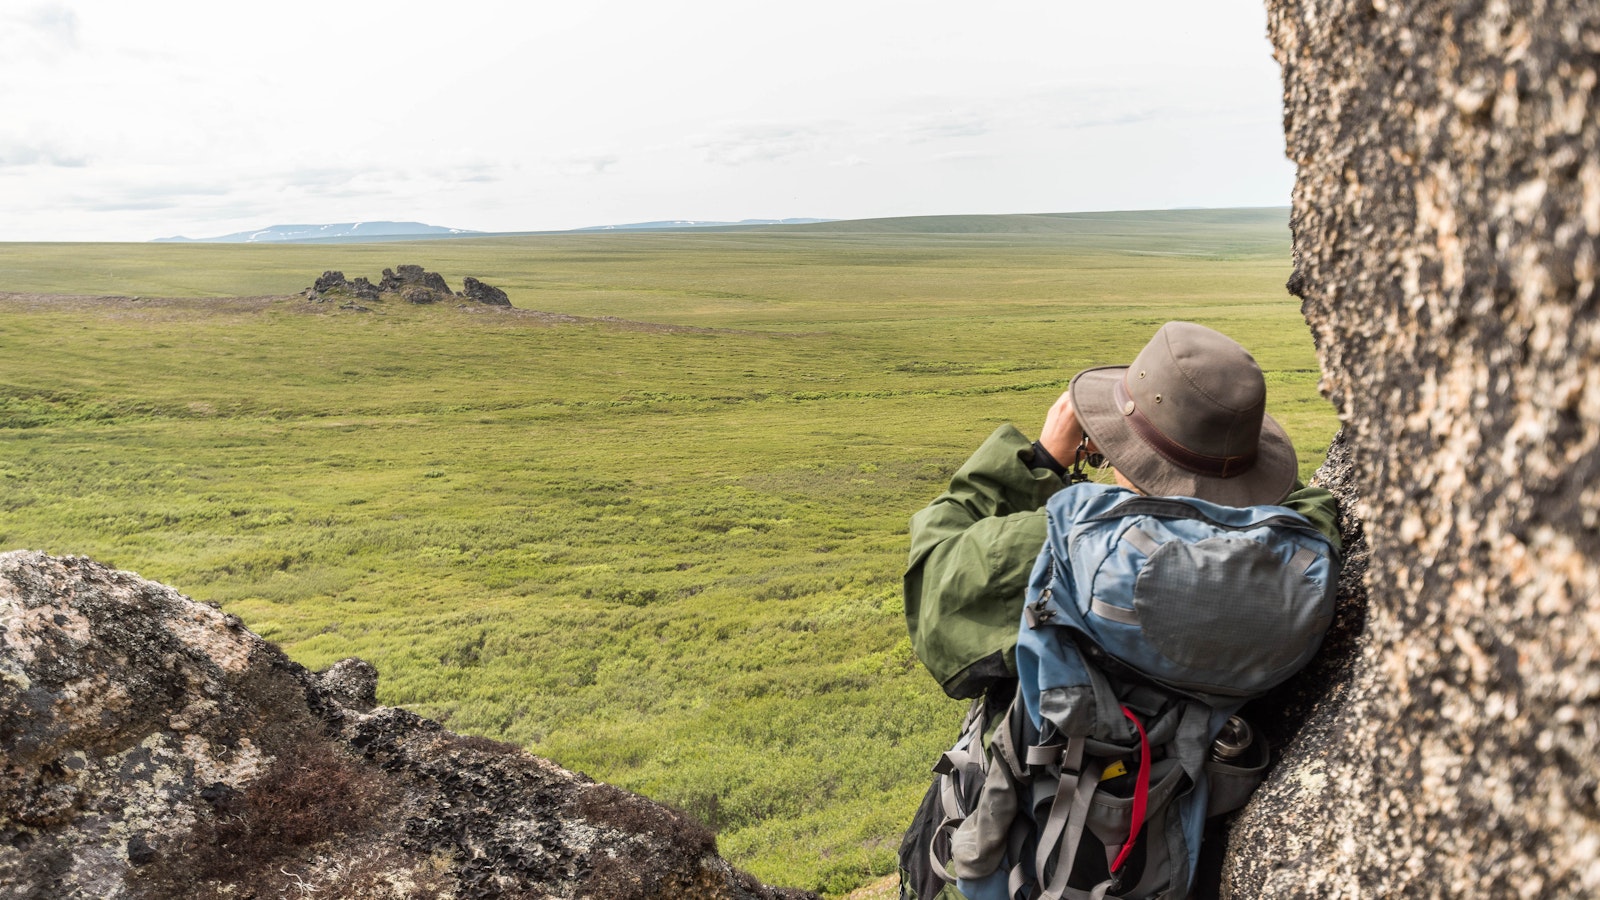 From behind, a female hiker leans against a tor and uses binoculars to look across a vast green landscape.